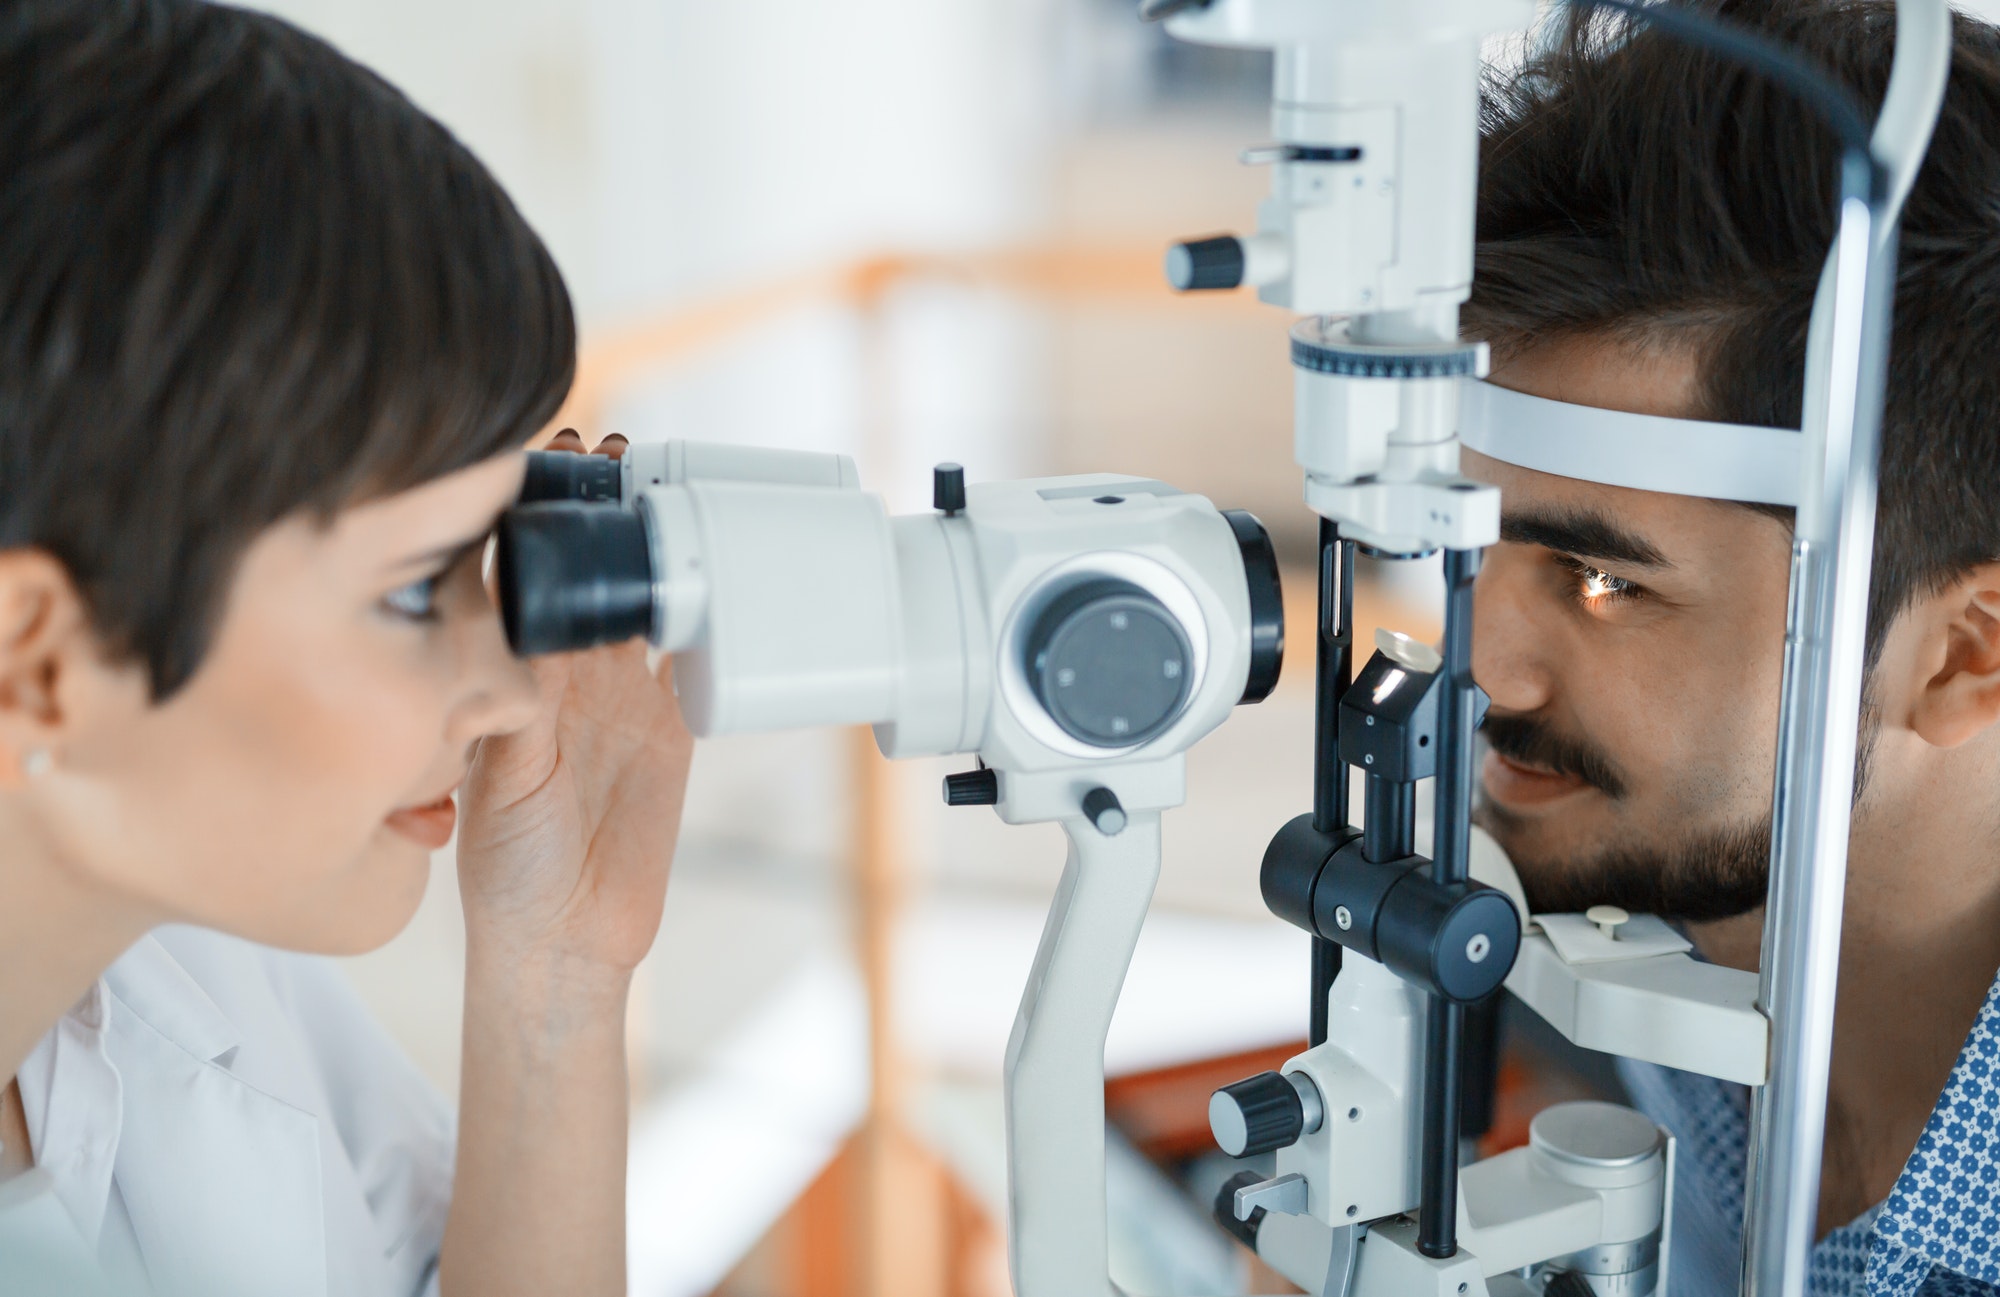 Woman doing eye test with optometrist in eye sight clinic